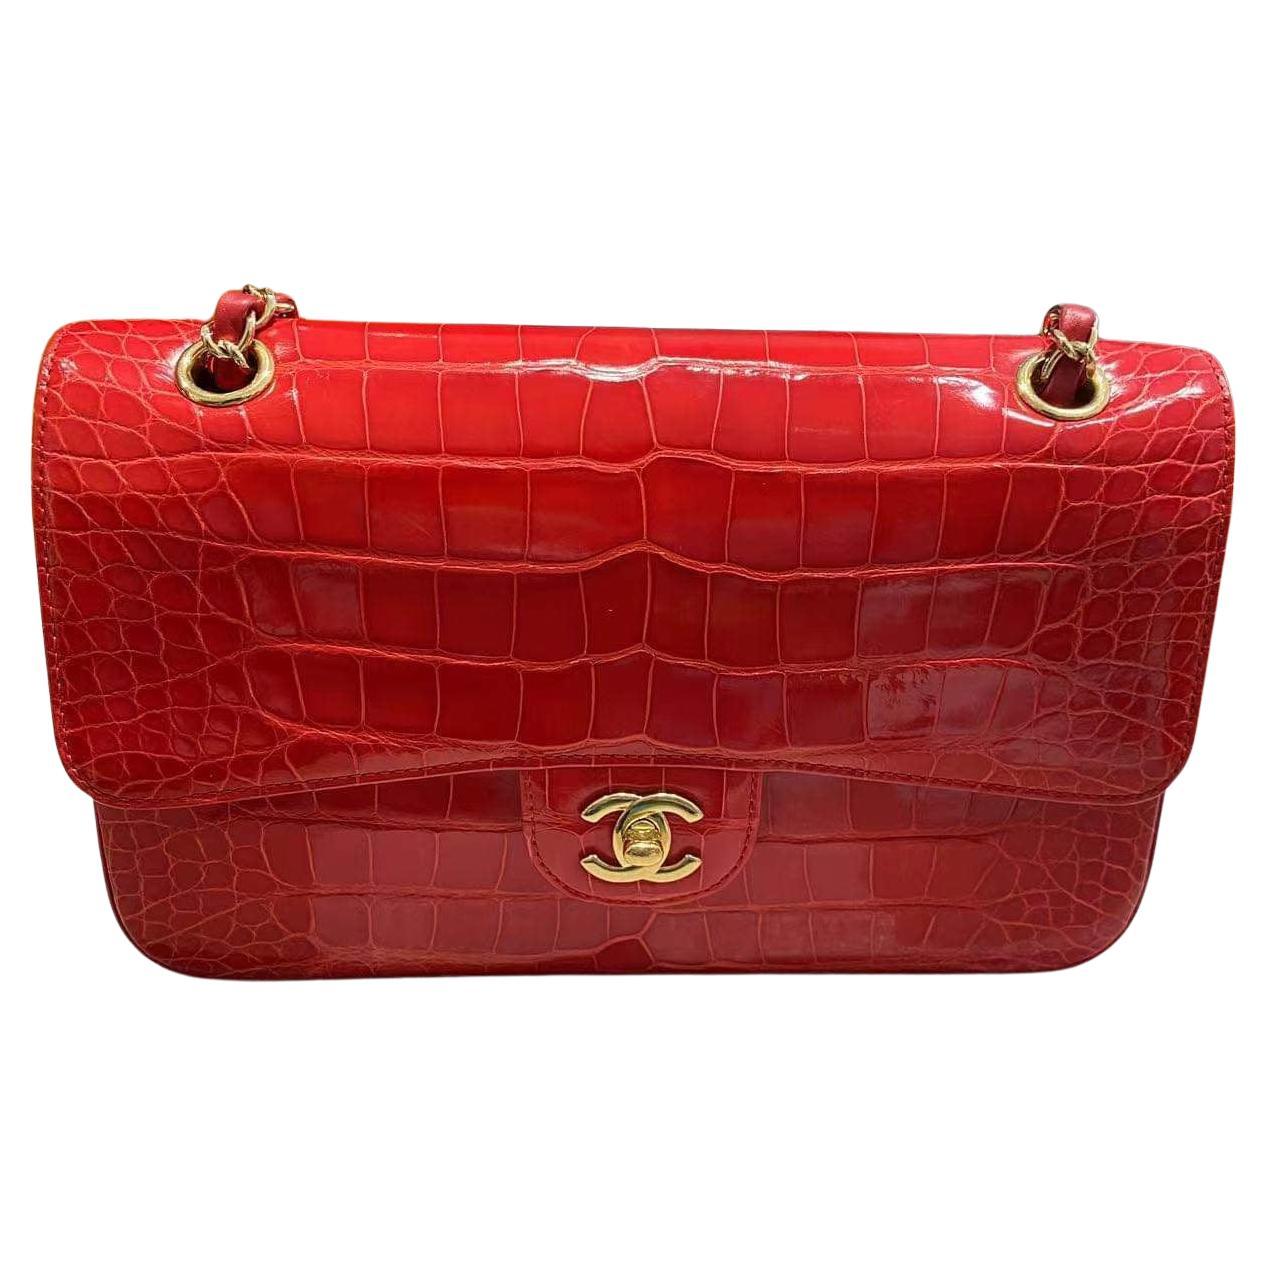 Chanel Medium Double Flap bag in shiny red alligator with gold hardware  For Sale